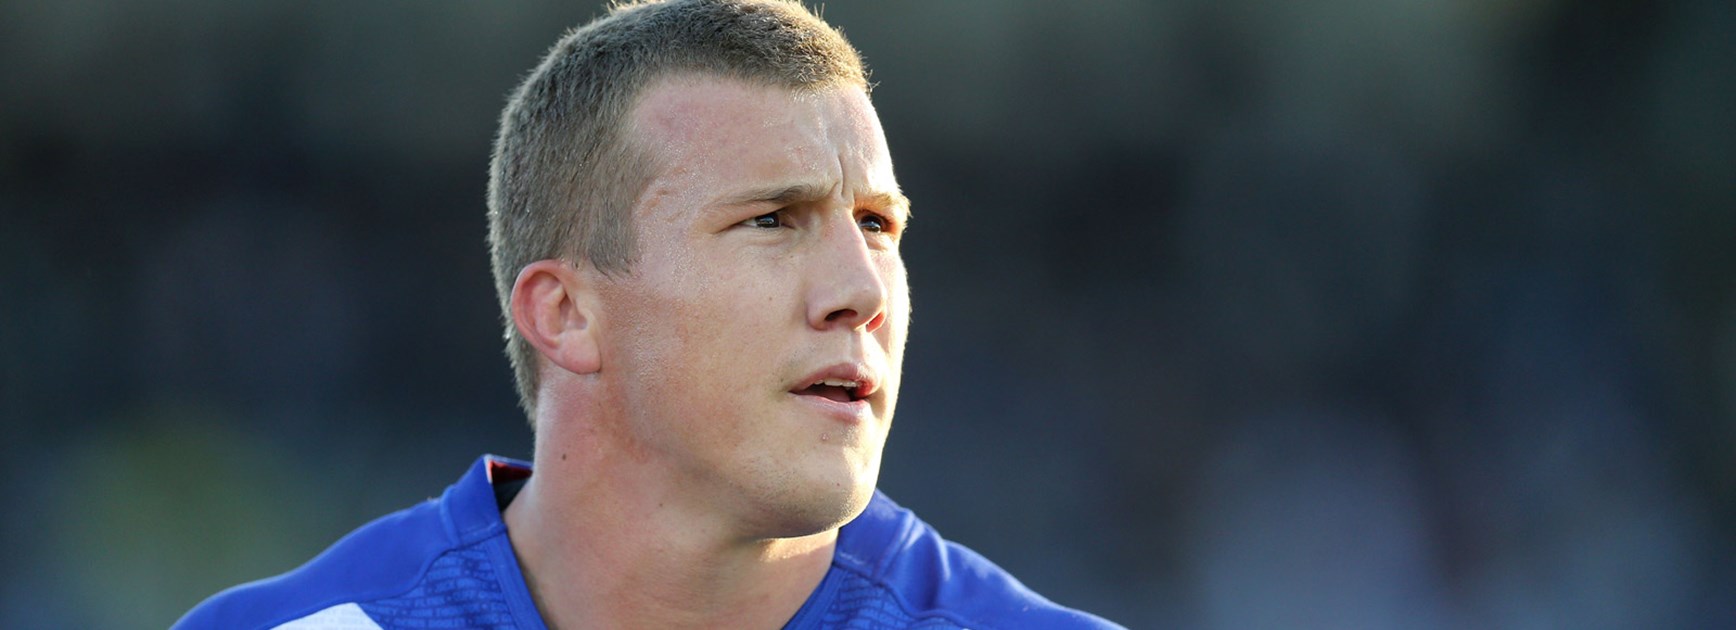 Bulldogs halfback Trent Hodkinson wants to finish his time at the club on a positive note.